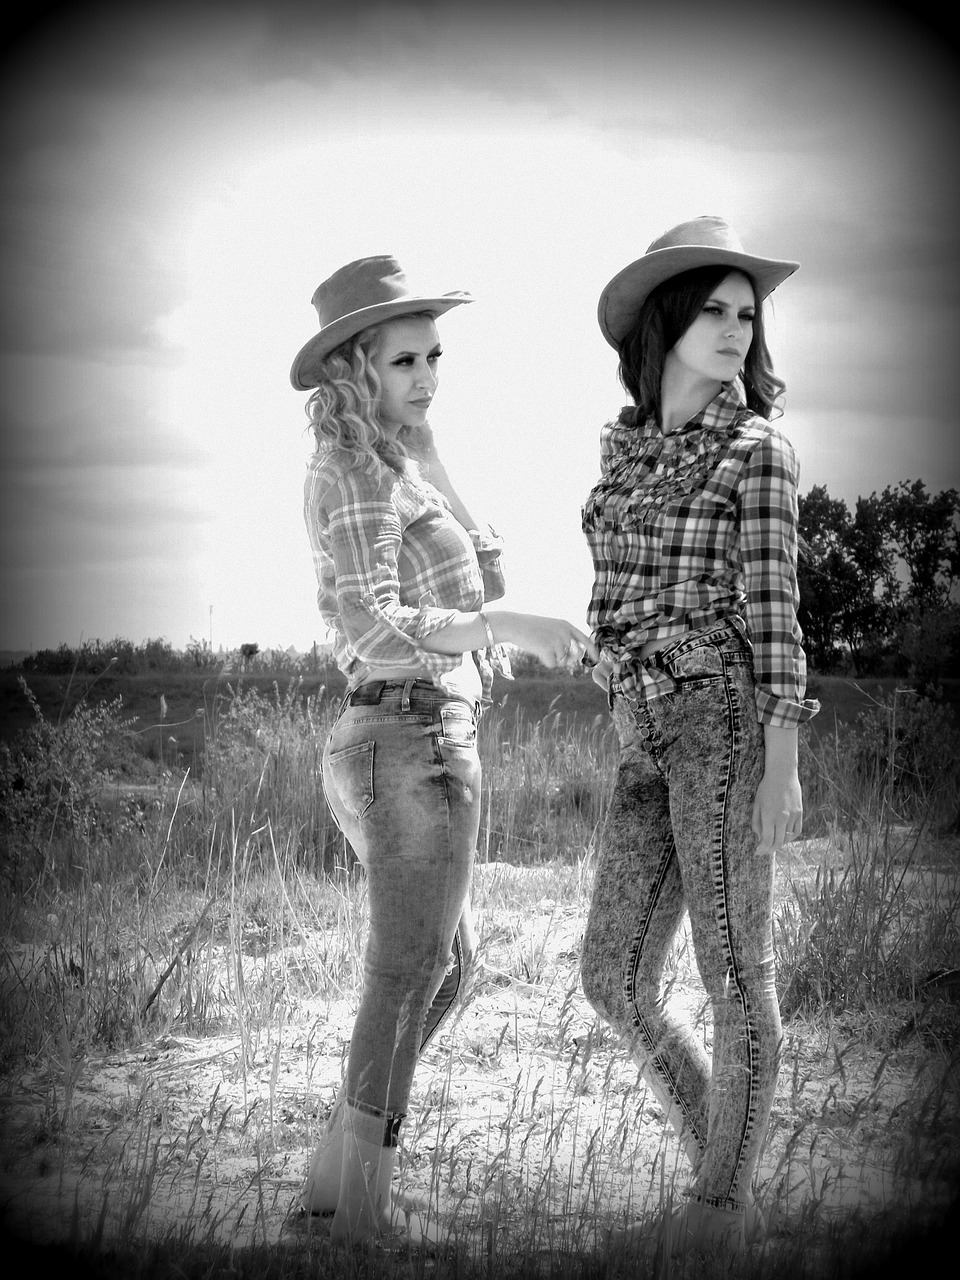 Cowgirlwild Westhatsbeautyfree Pictures Free Image From